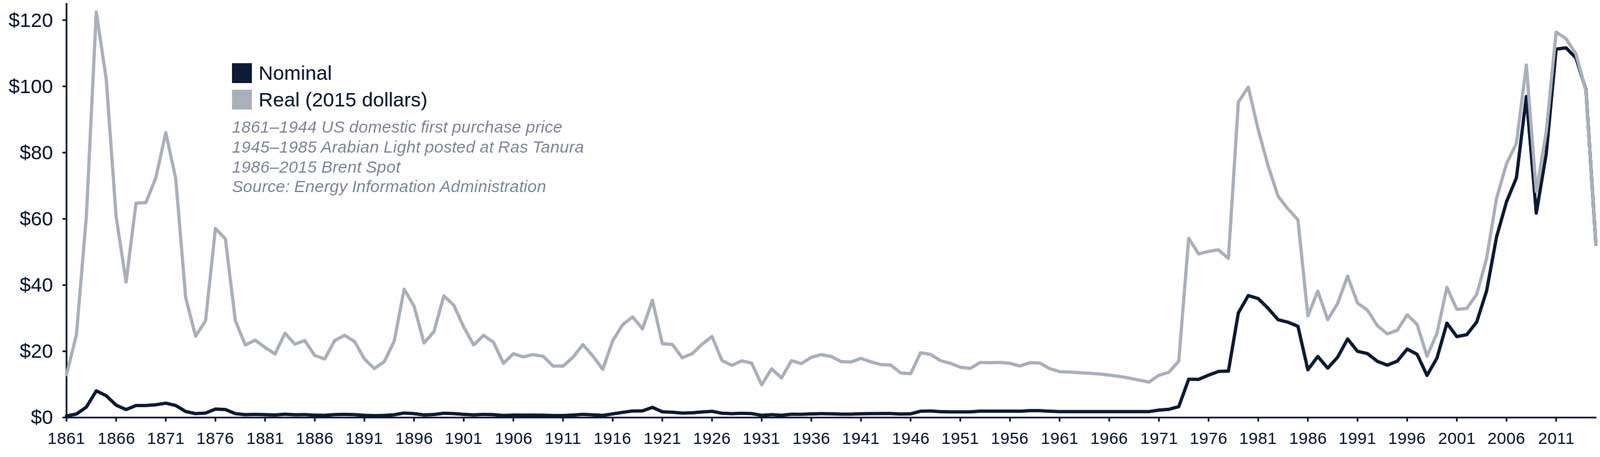 Graph of oil prices from 1861 to 2007, showing a sharp increase in 1973, and again in 1979